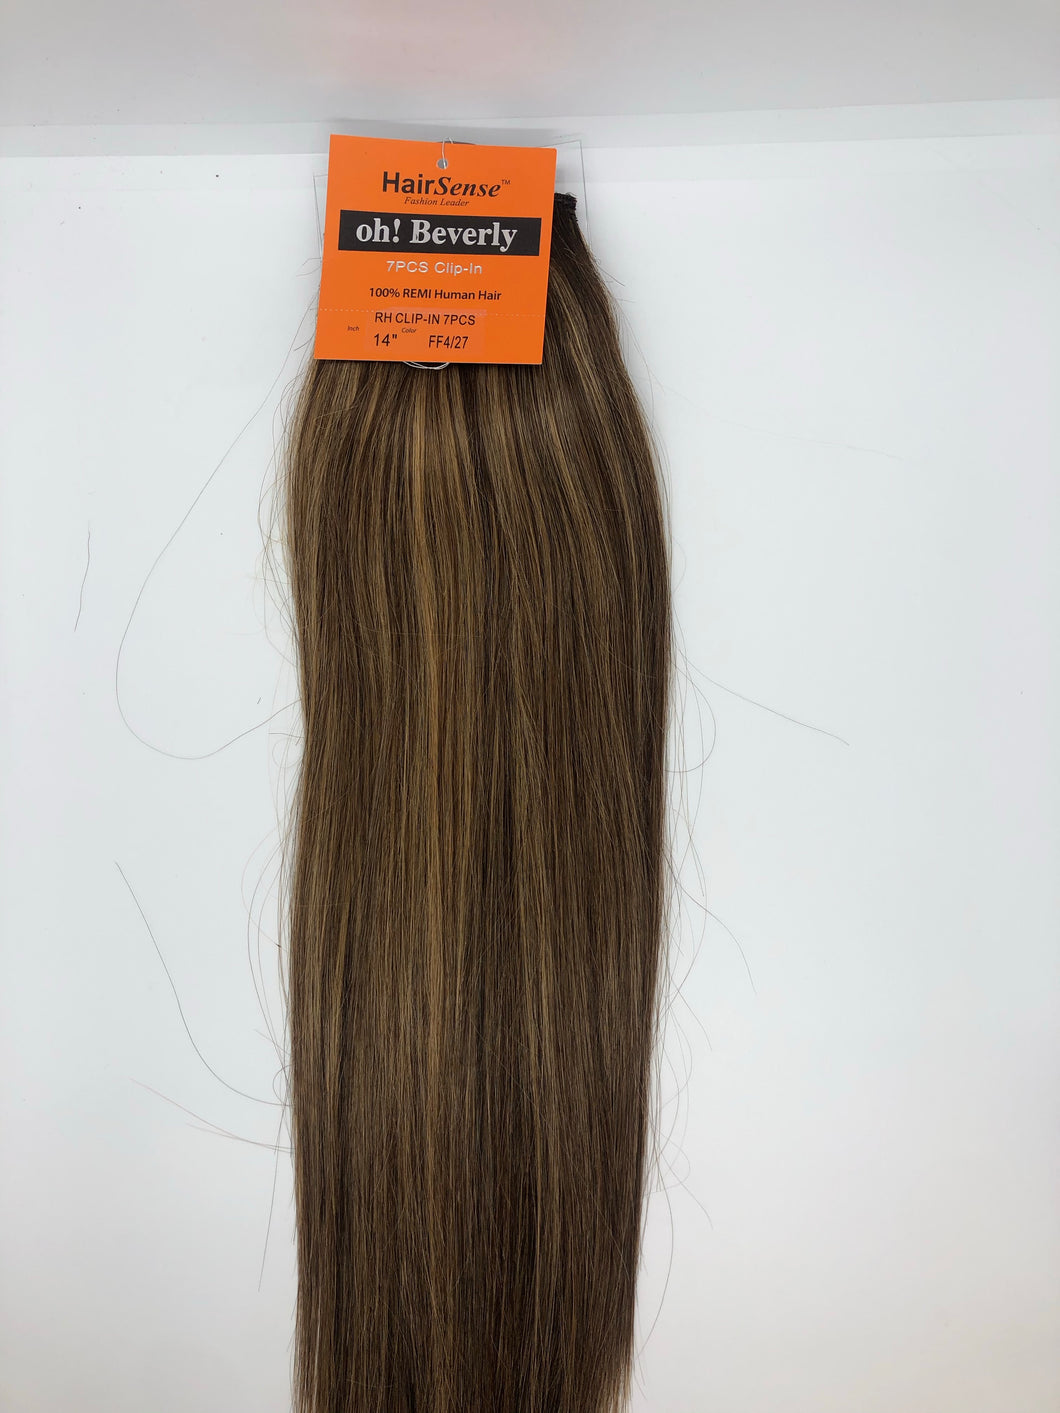 Hair Sense oh! Beverly 7 Piece Clip-In 100% REMI Human Hair Extension - Color: FF4/27